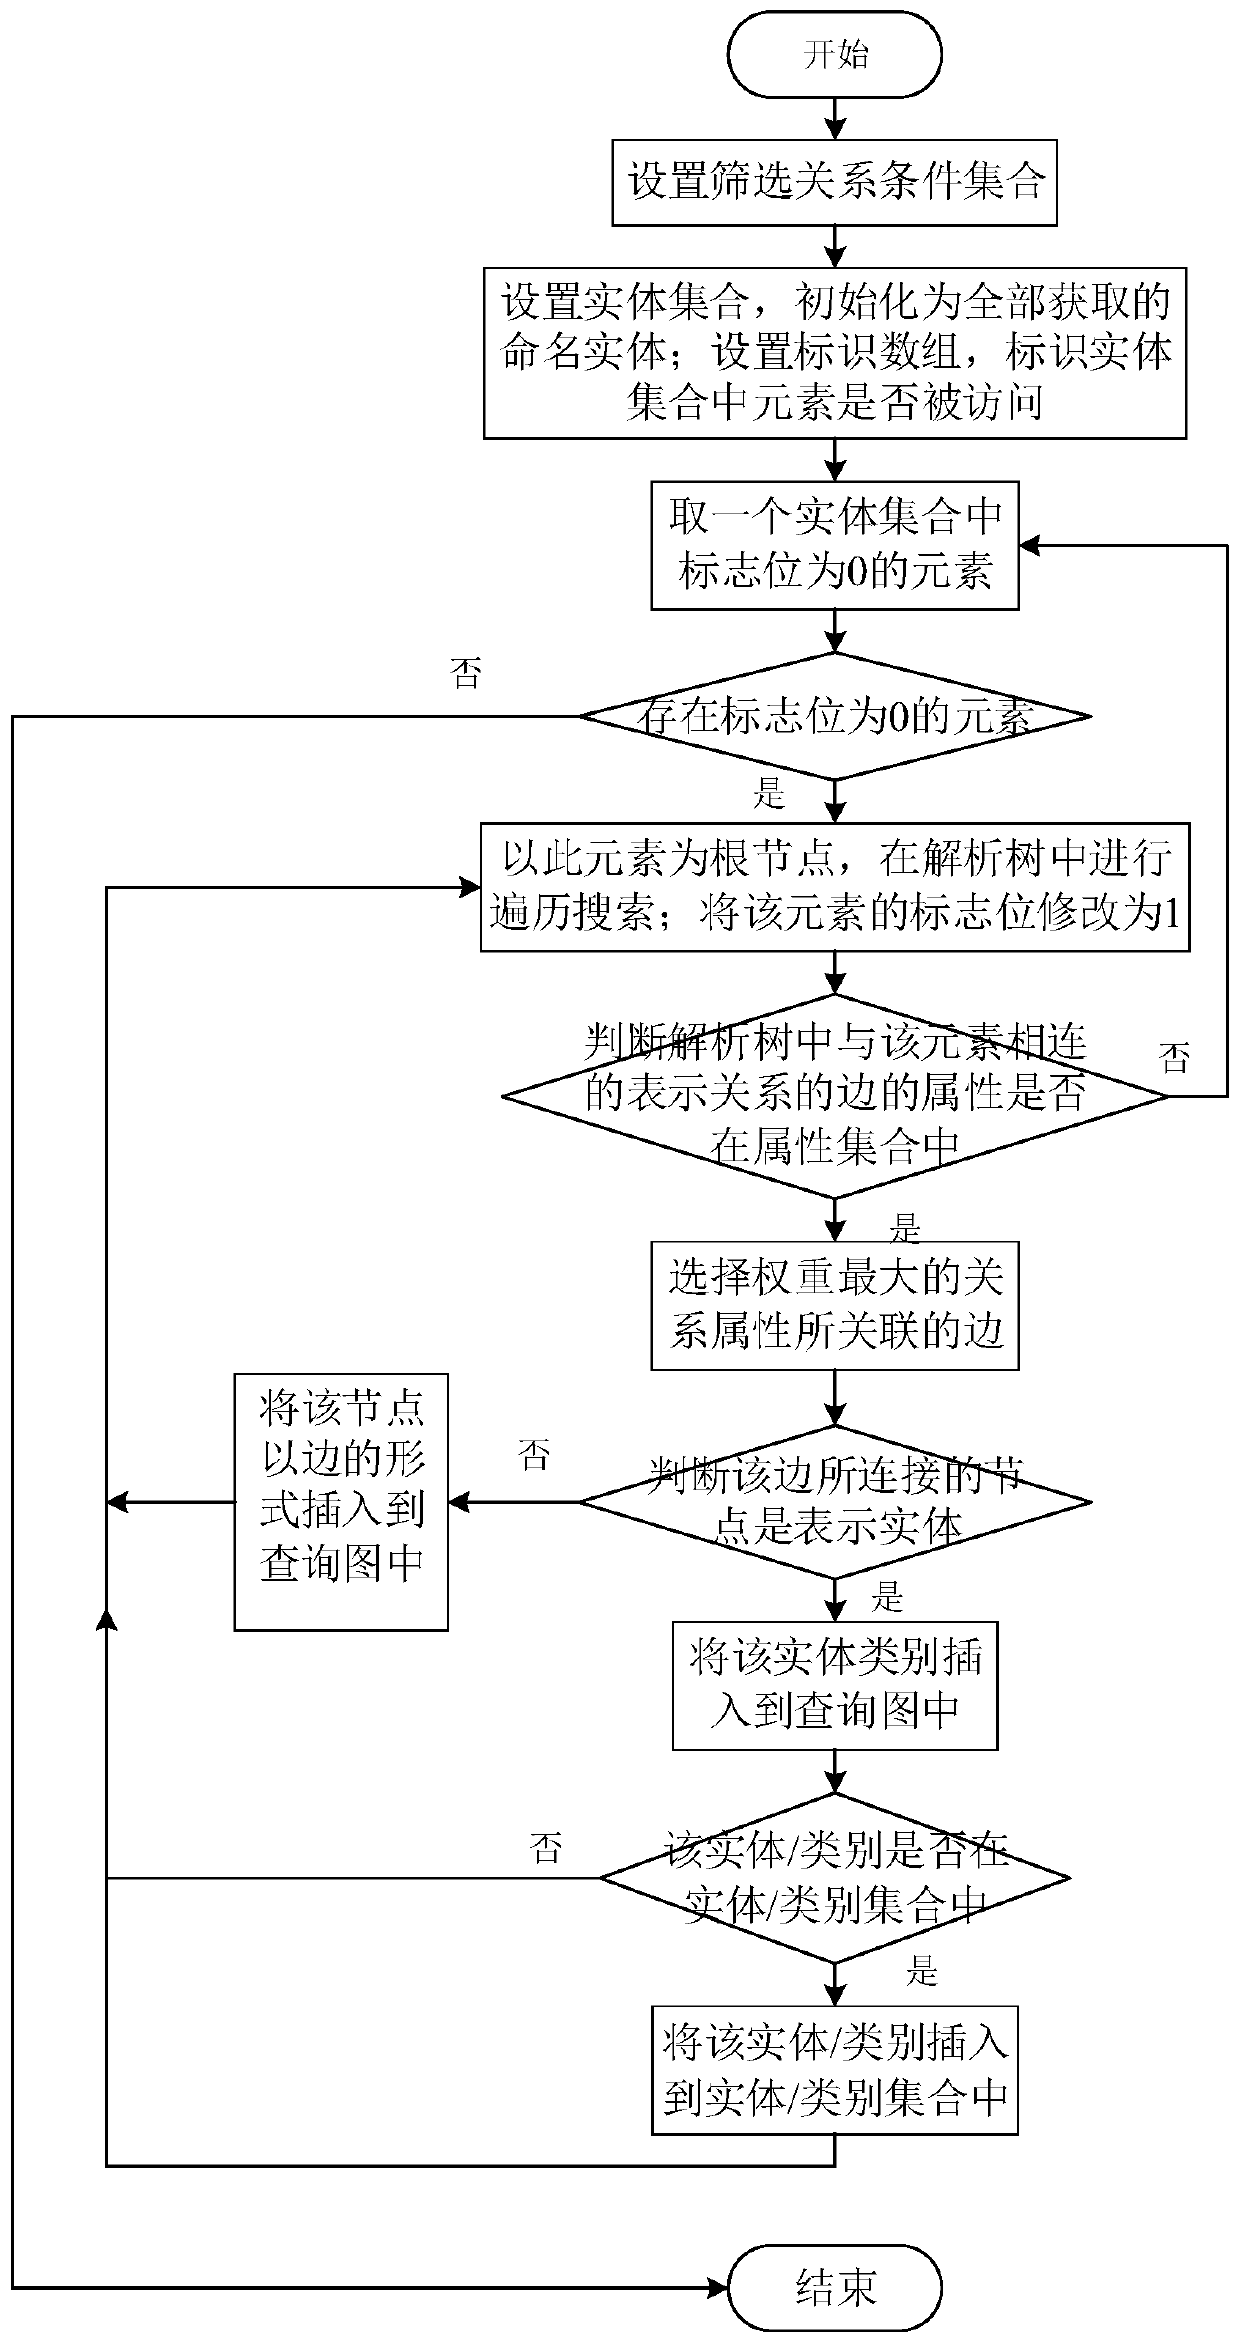 Natural language question answering method and system based on question sentence and knowledge graph structure analysis